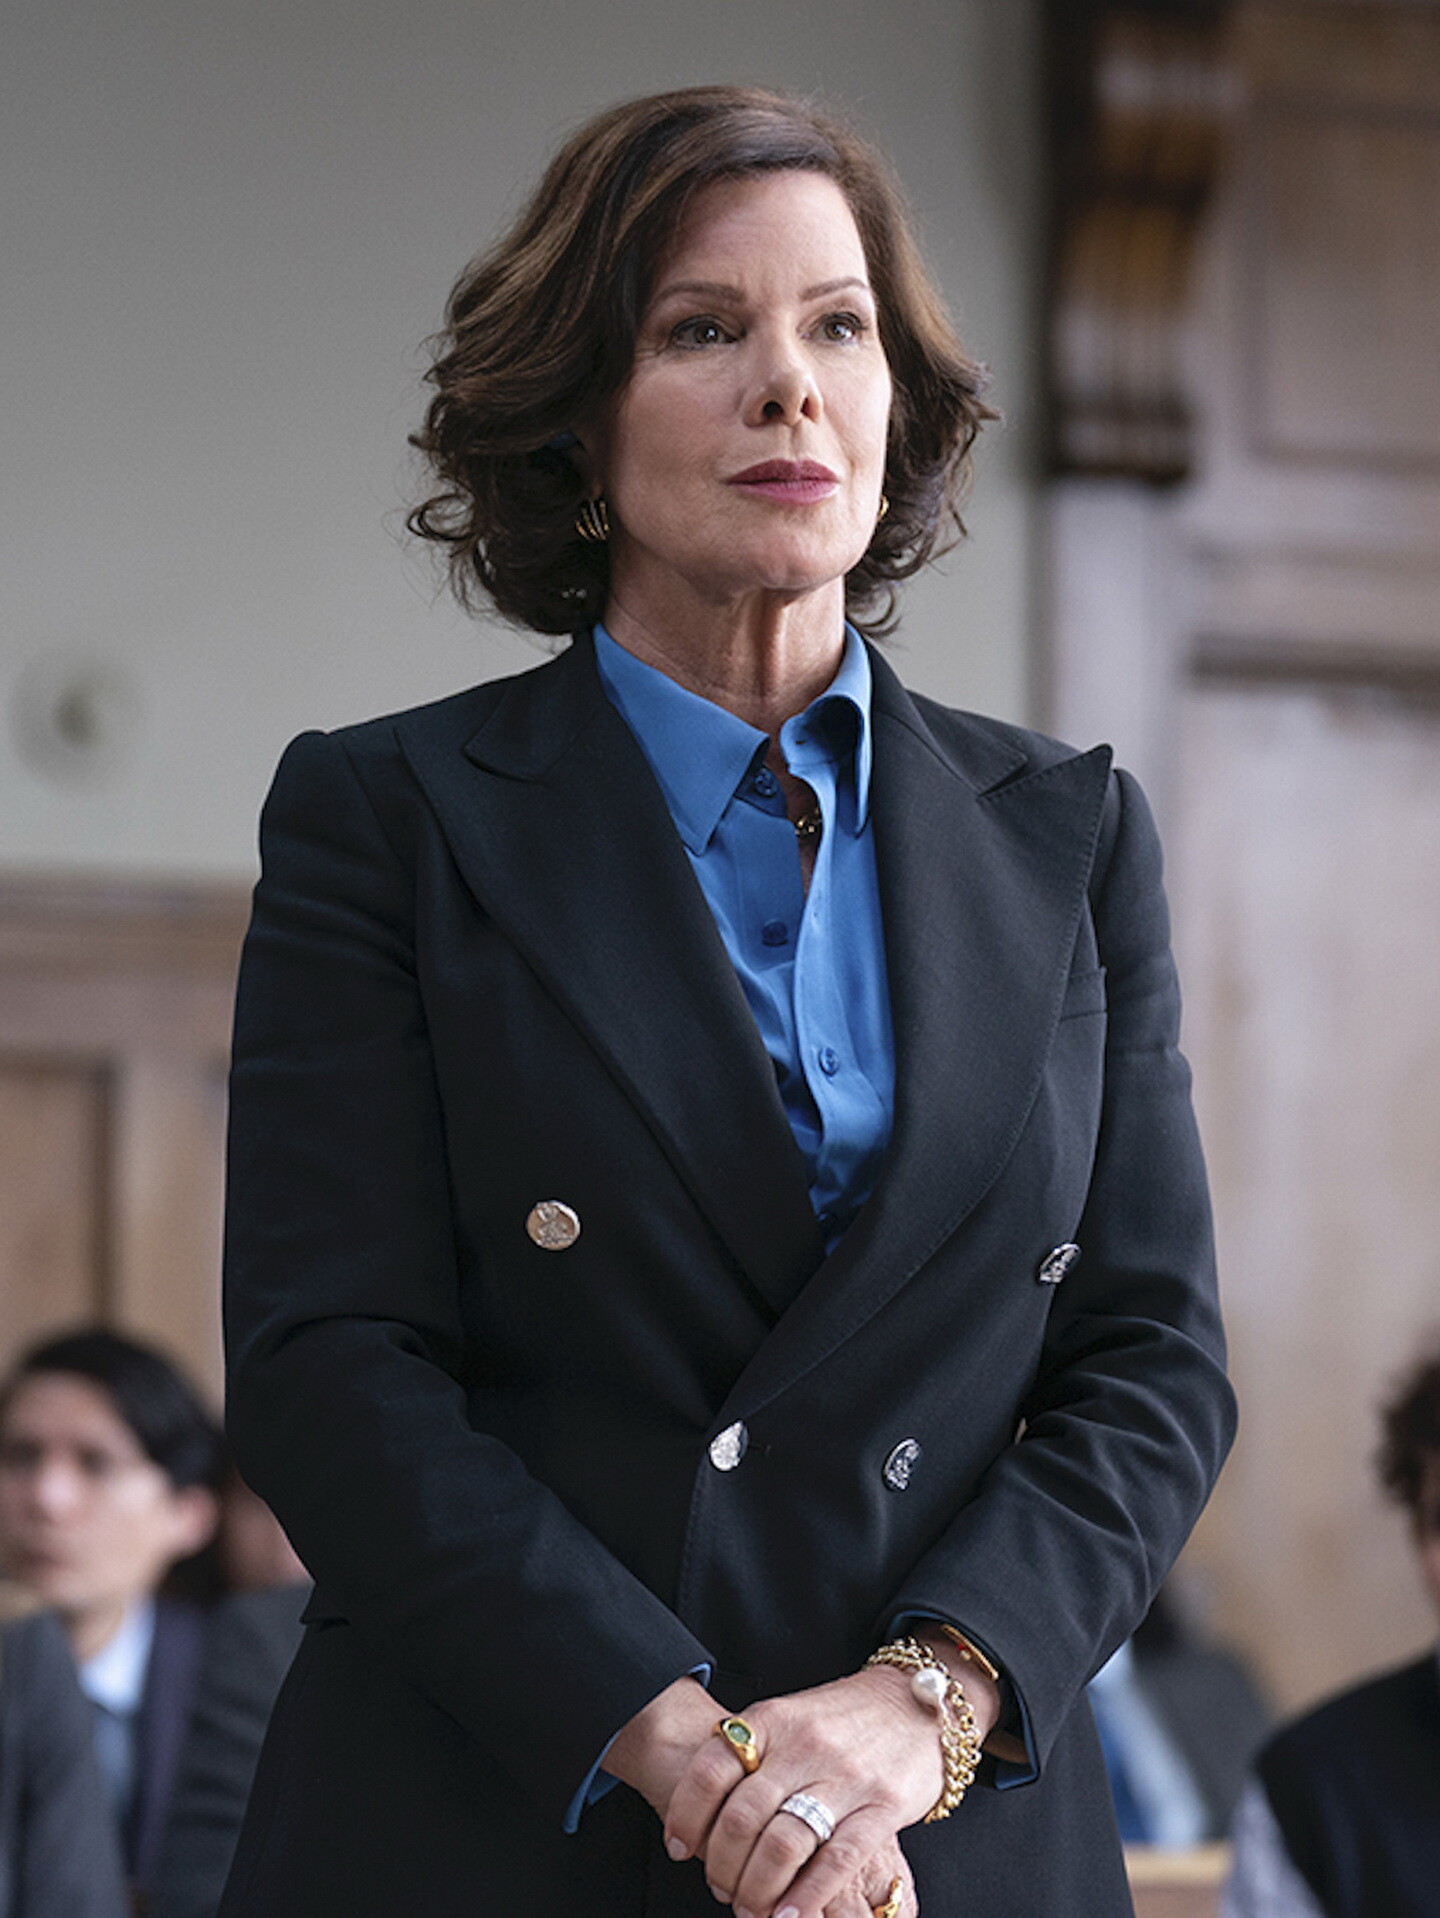 So Help Me Todd (TV Series): Marcia Gay Harden as Margaret, a defense attorney, CBS legal drama. 1440x1920 HD Background.